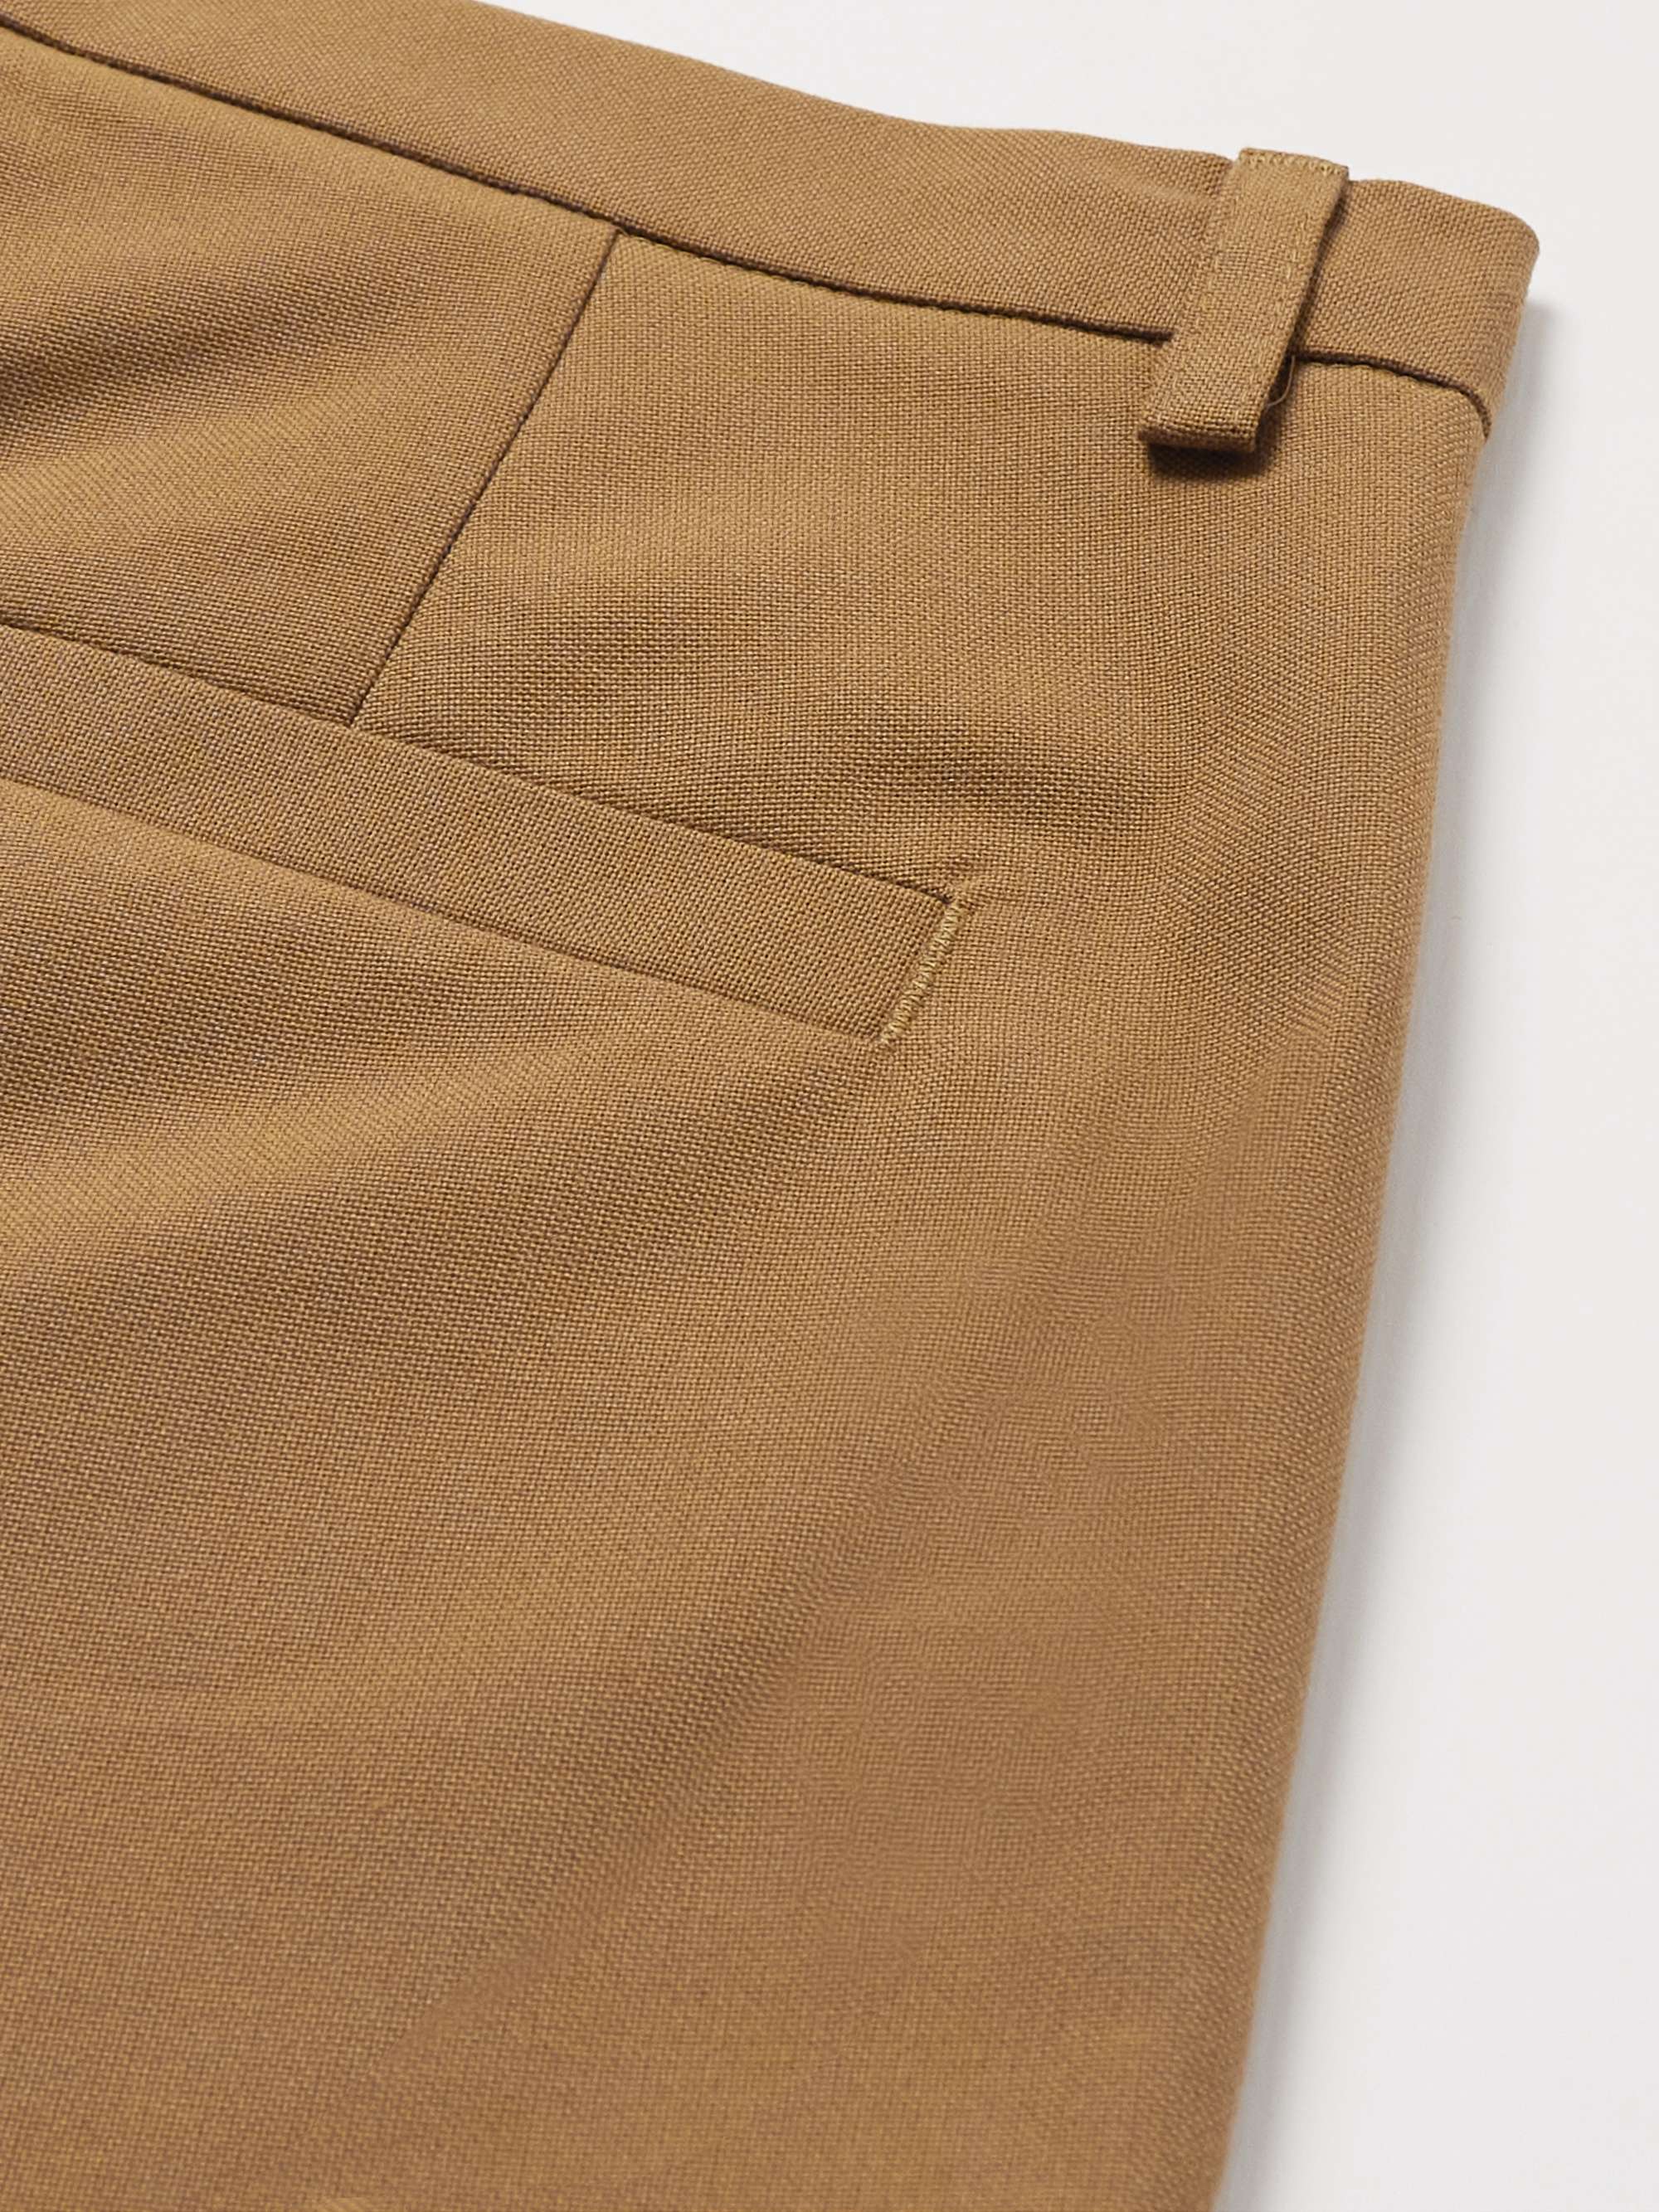 SÉFR Harvey Slim-Fit Tapered Woven Trousers